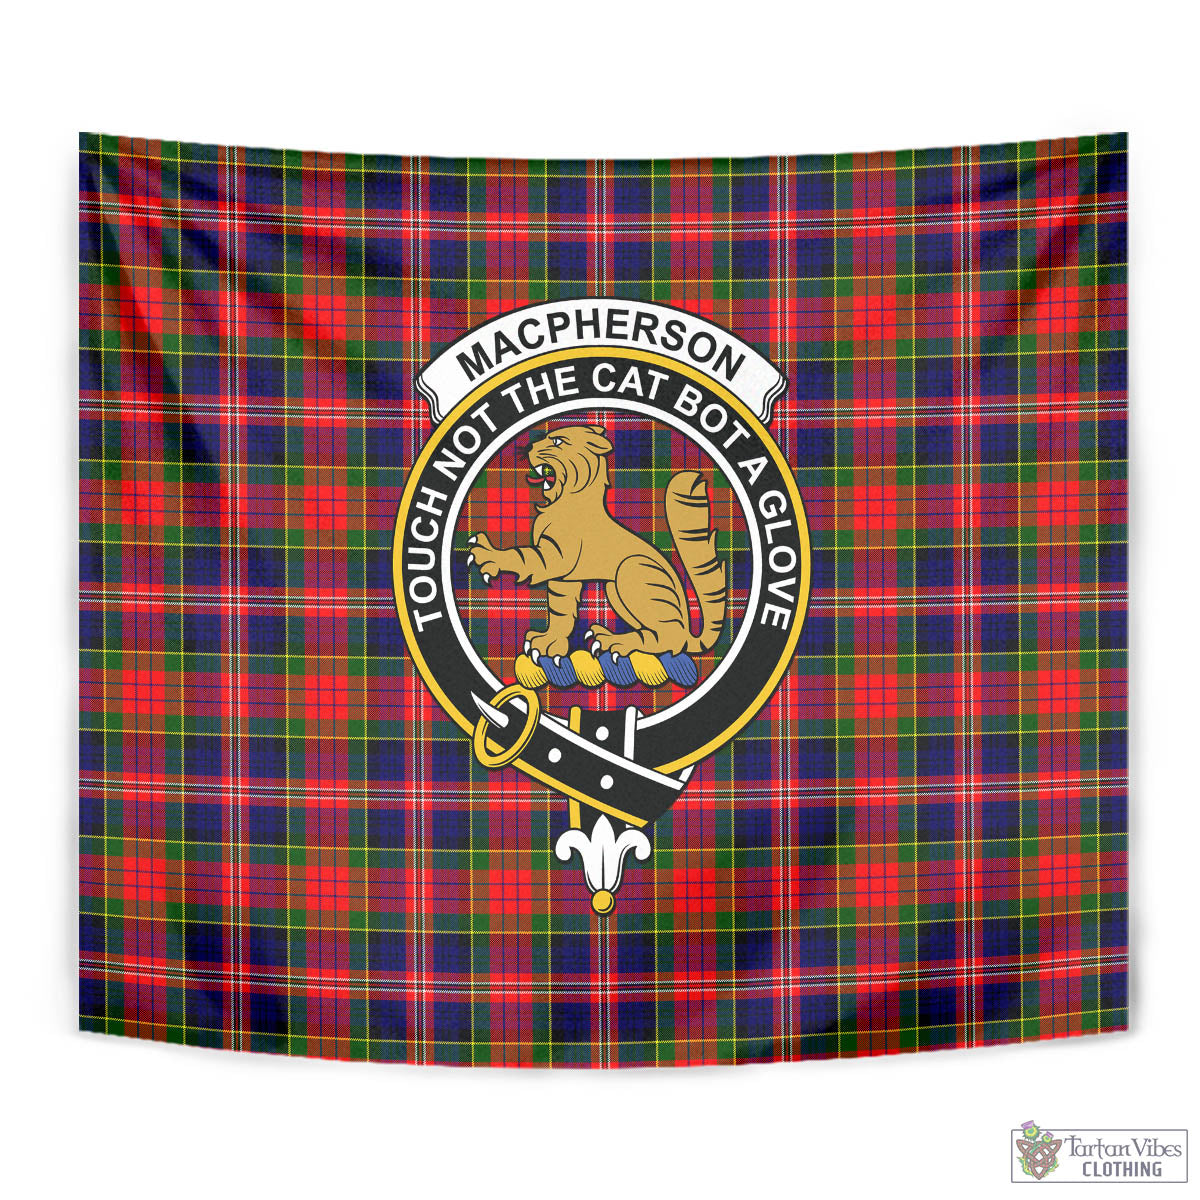 Tartan Vibes Clothing MacPherson Modern Tartan Tapestry Wall Hanging and Home Decor for Room with Family Crest